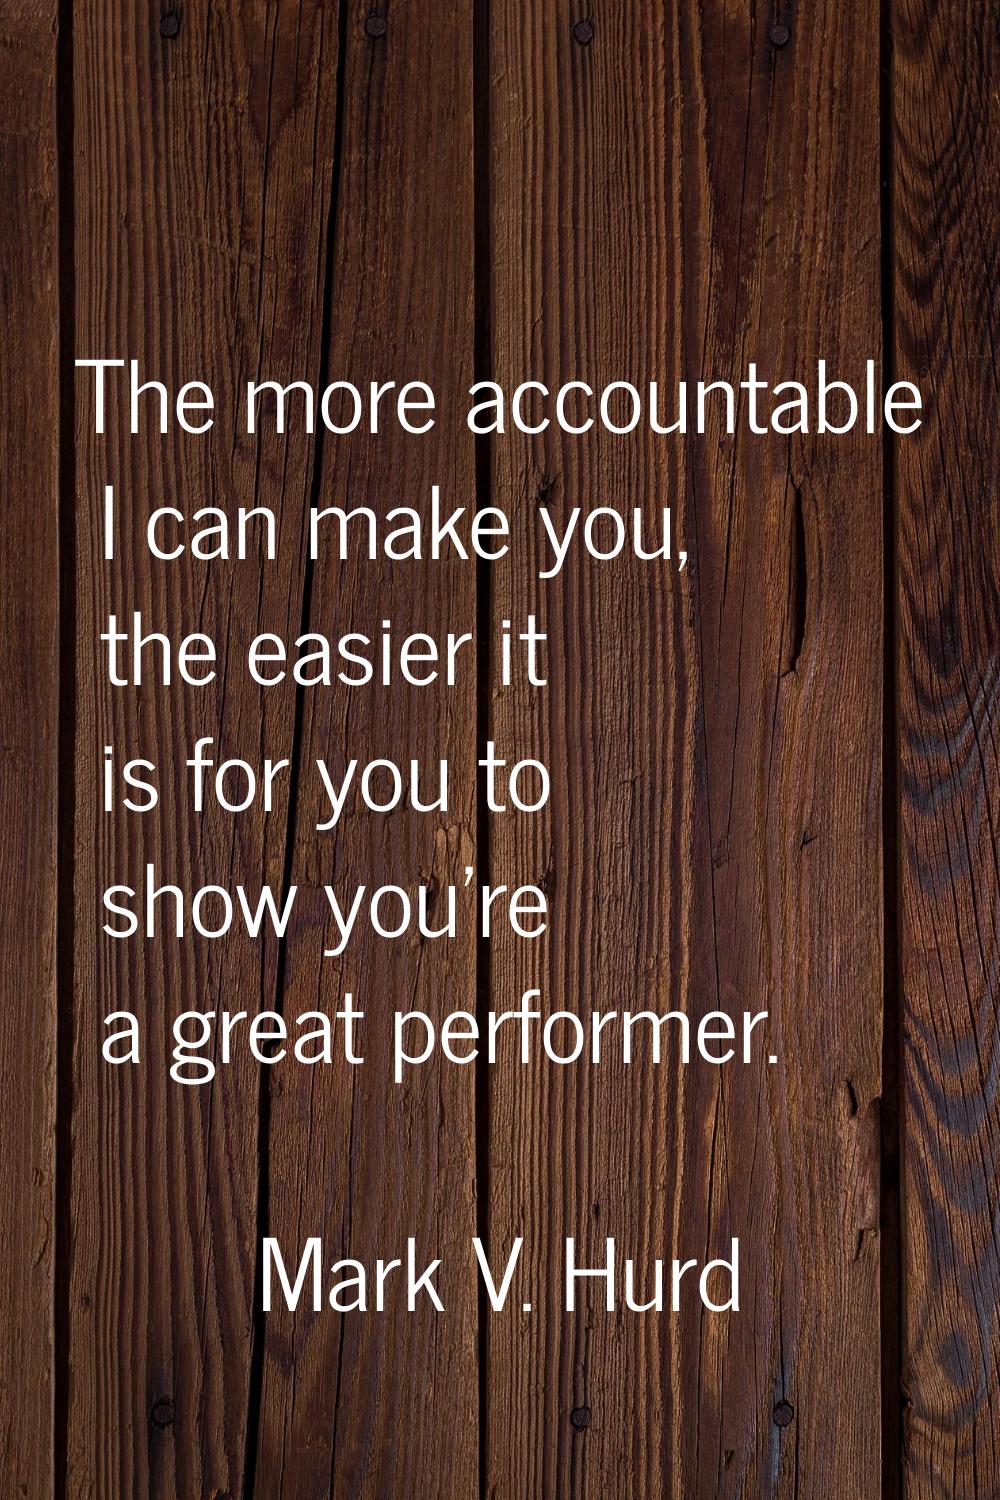 The more accountable I can make you, the easier it is for you to show you're a great performer.